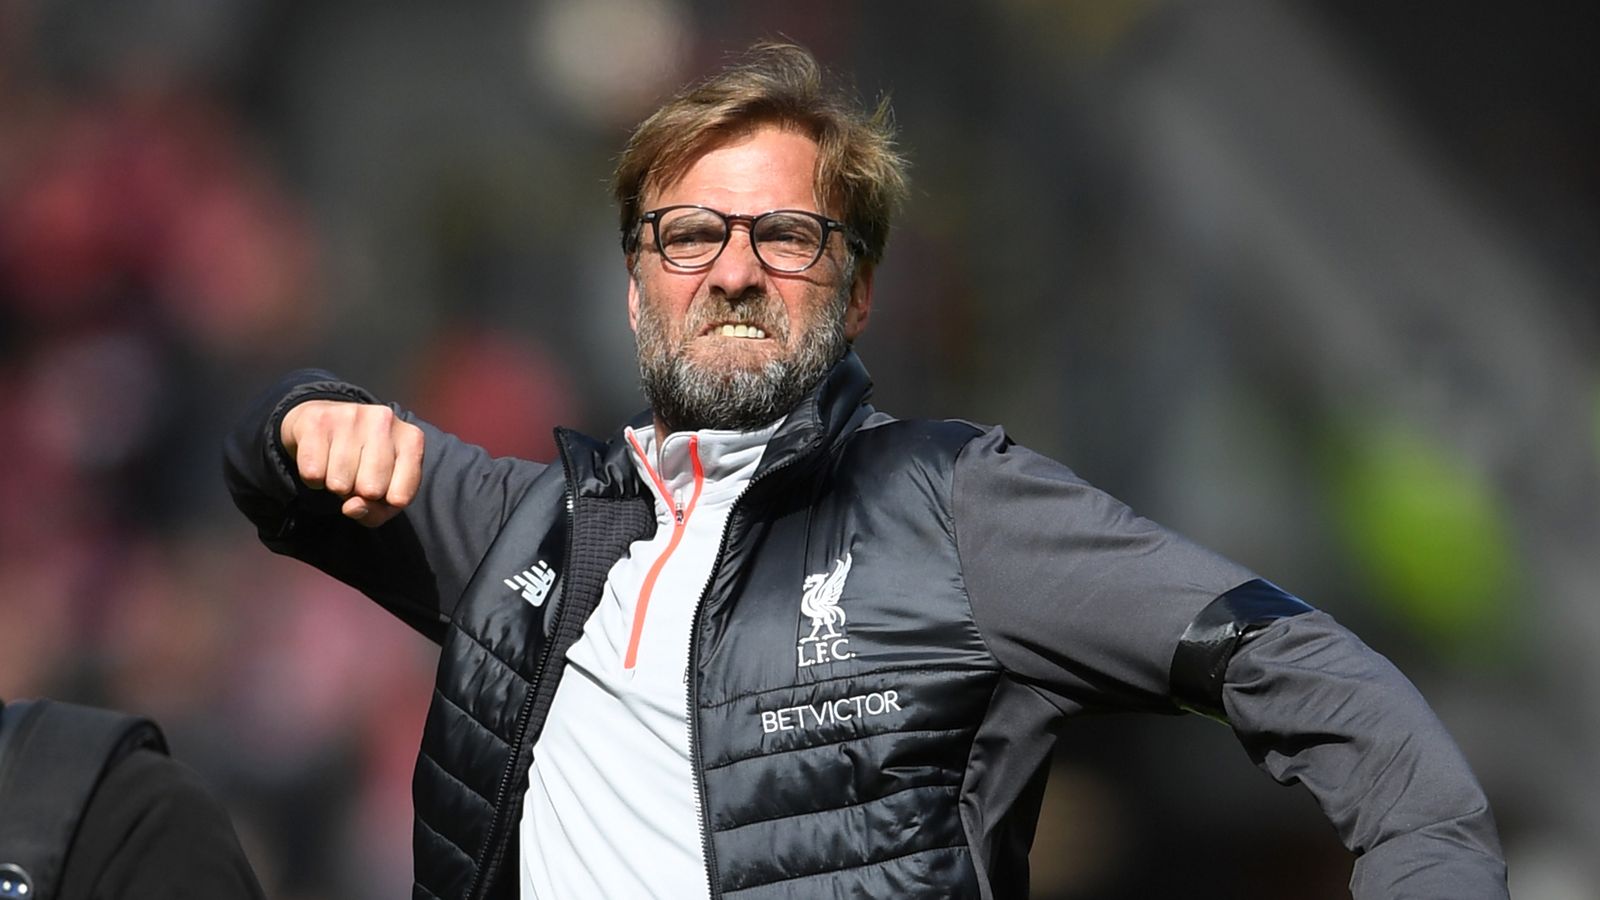 klopp jurgen liverpool satisfied only qualification champions boss league match finish four arsenal against after